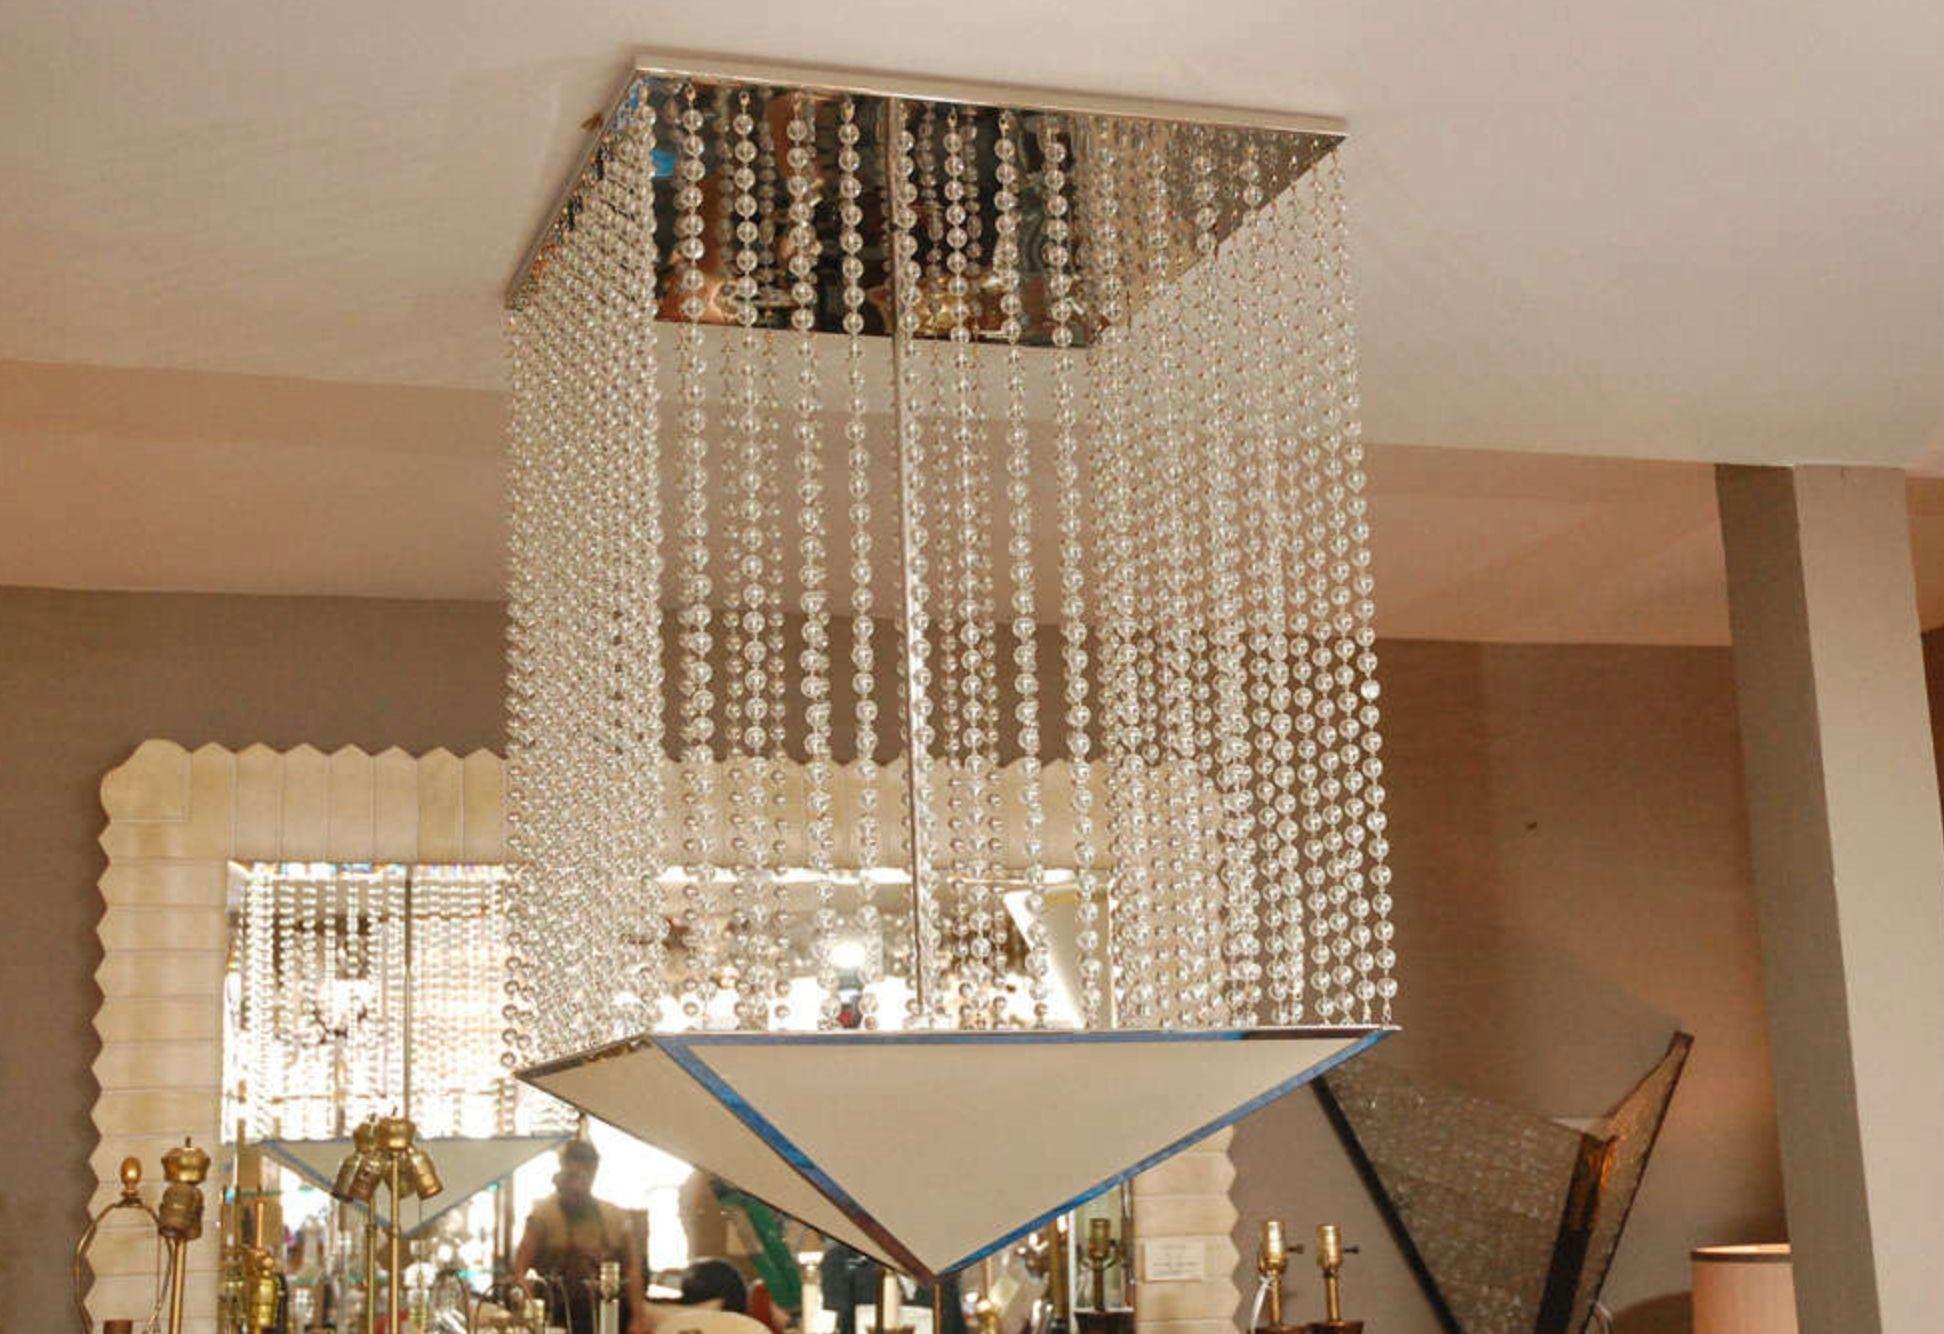 This is a prototype chandelier by Bryan Cox. Composed of hanging glass beads from a nickel ceiling plate. Shade is made of stiff linen framed in nickel.